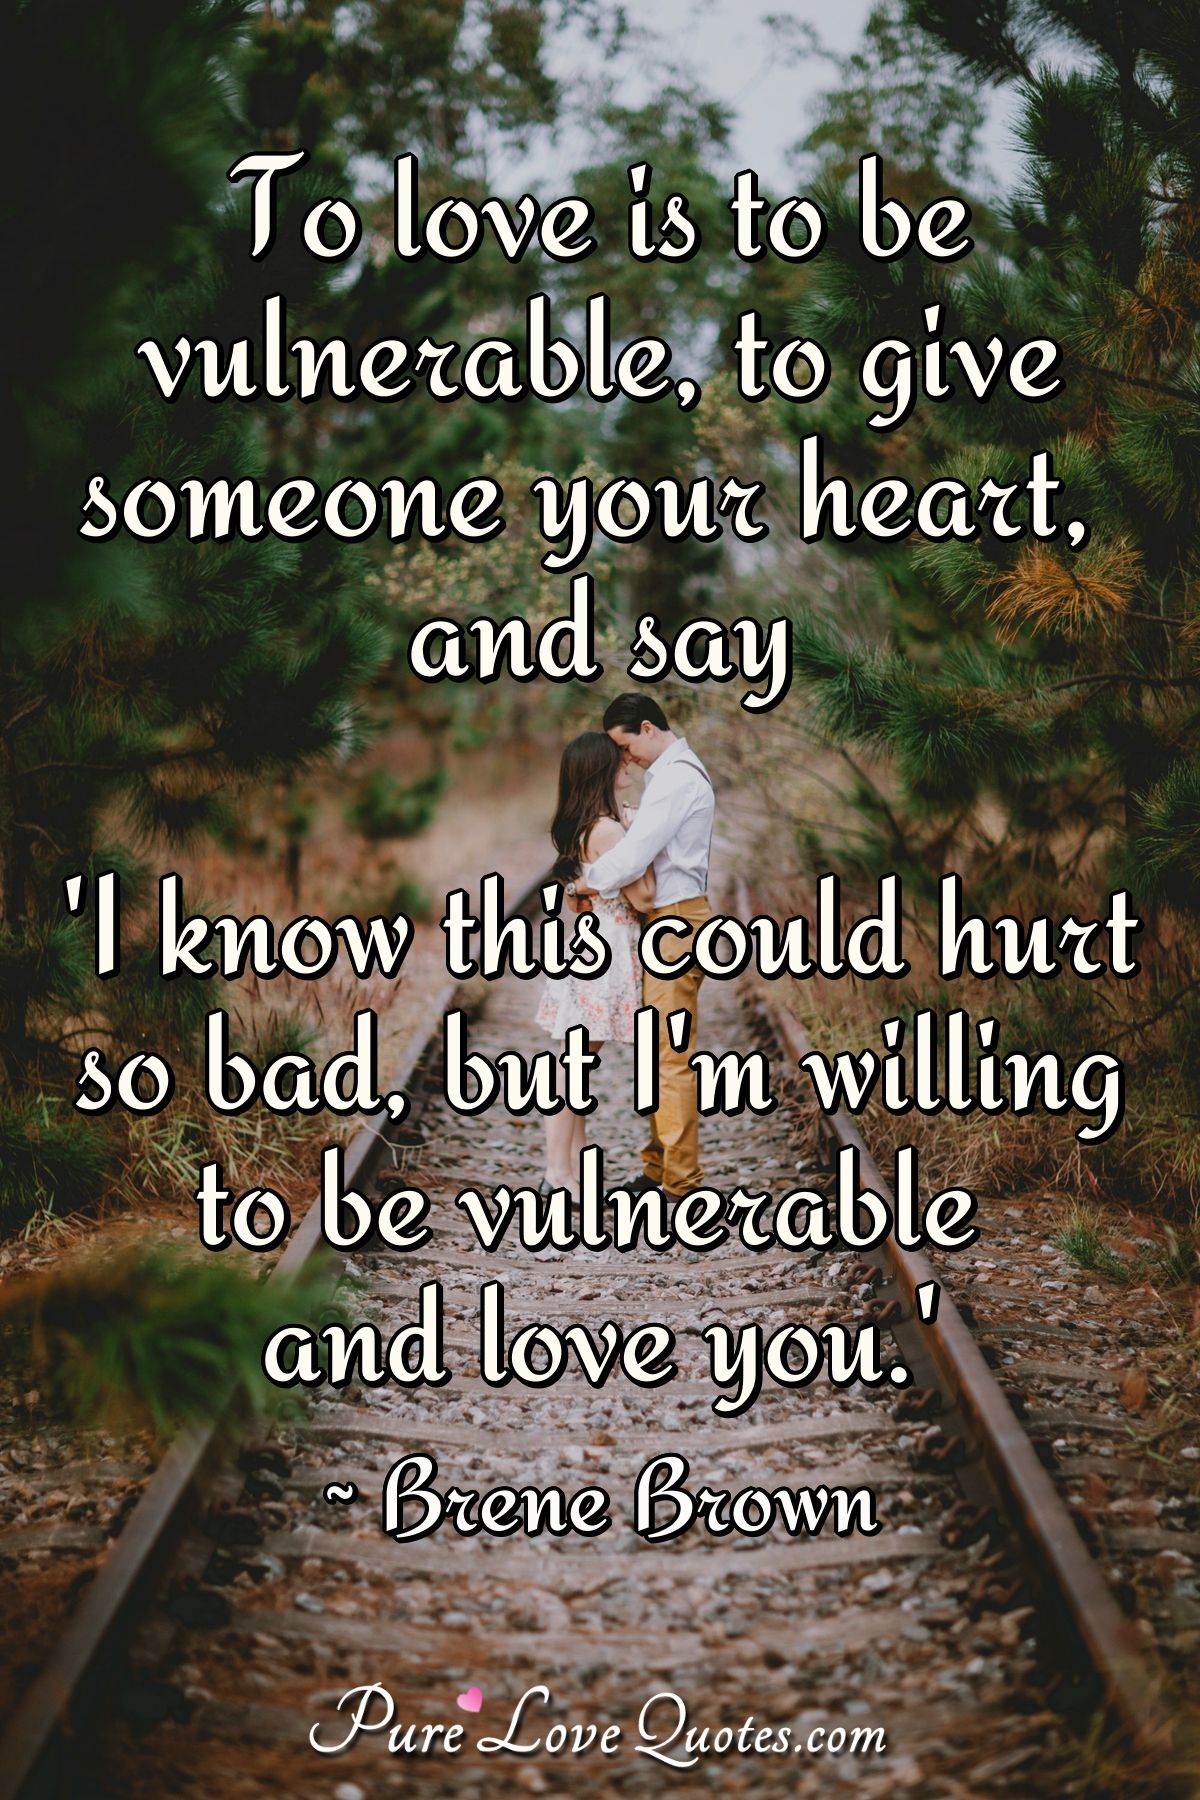 To love is to be vulnerable, to give someone your heart, and say 'I know this could hurt so bad, but I'm willing to be vulnerable and love you.' - Brene Brown